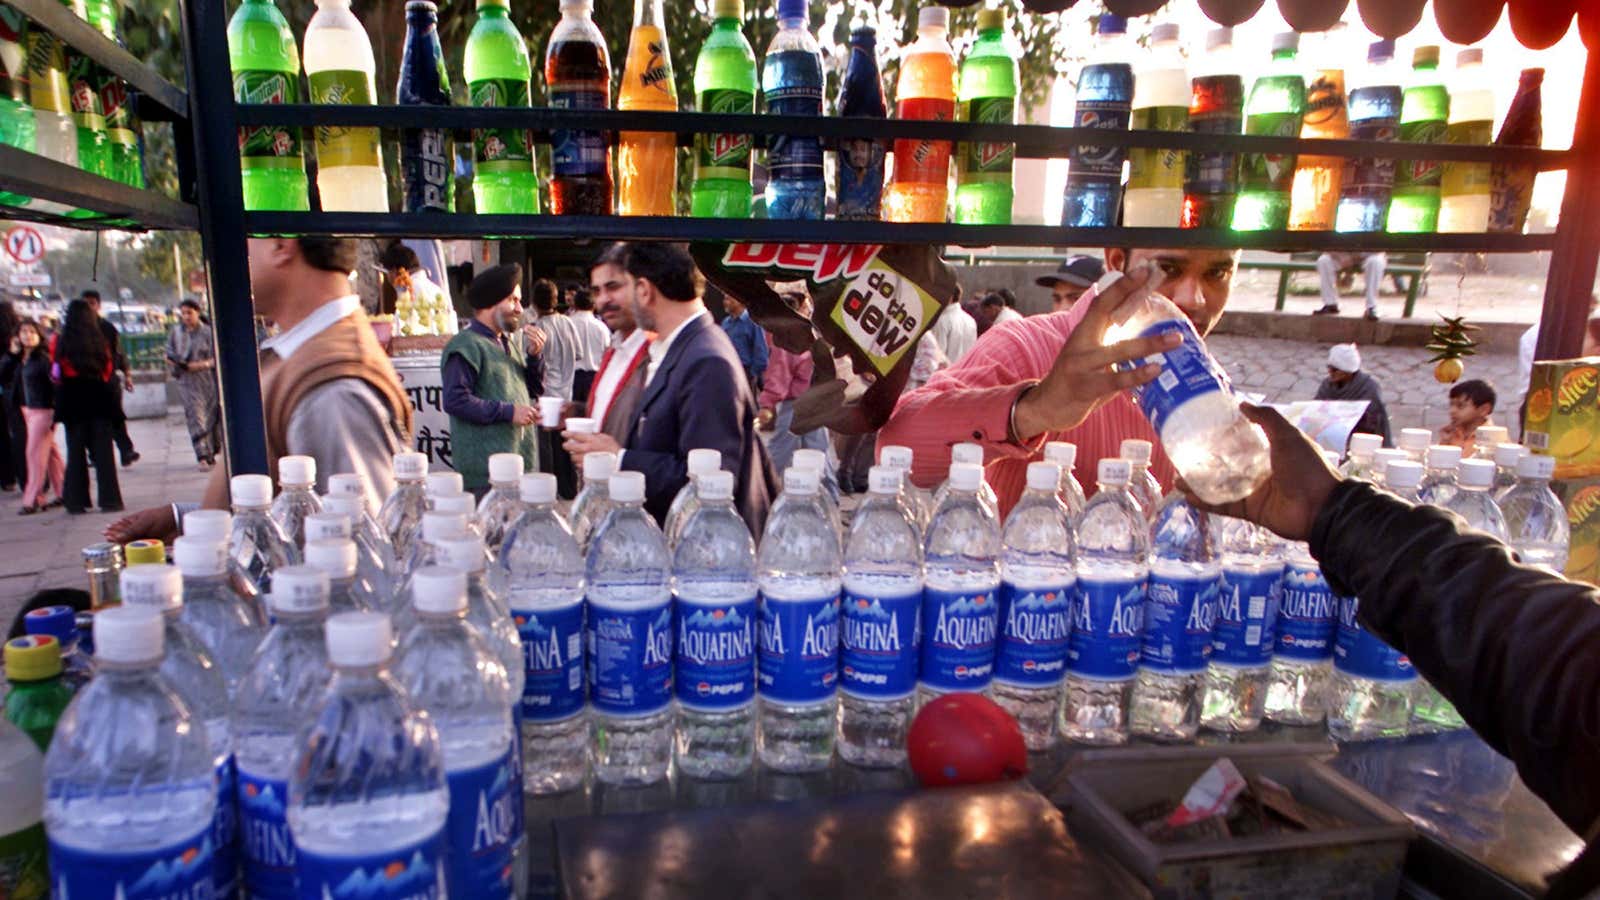 Carbonated drinks are the most preferred drinks in India after bottled water.